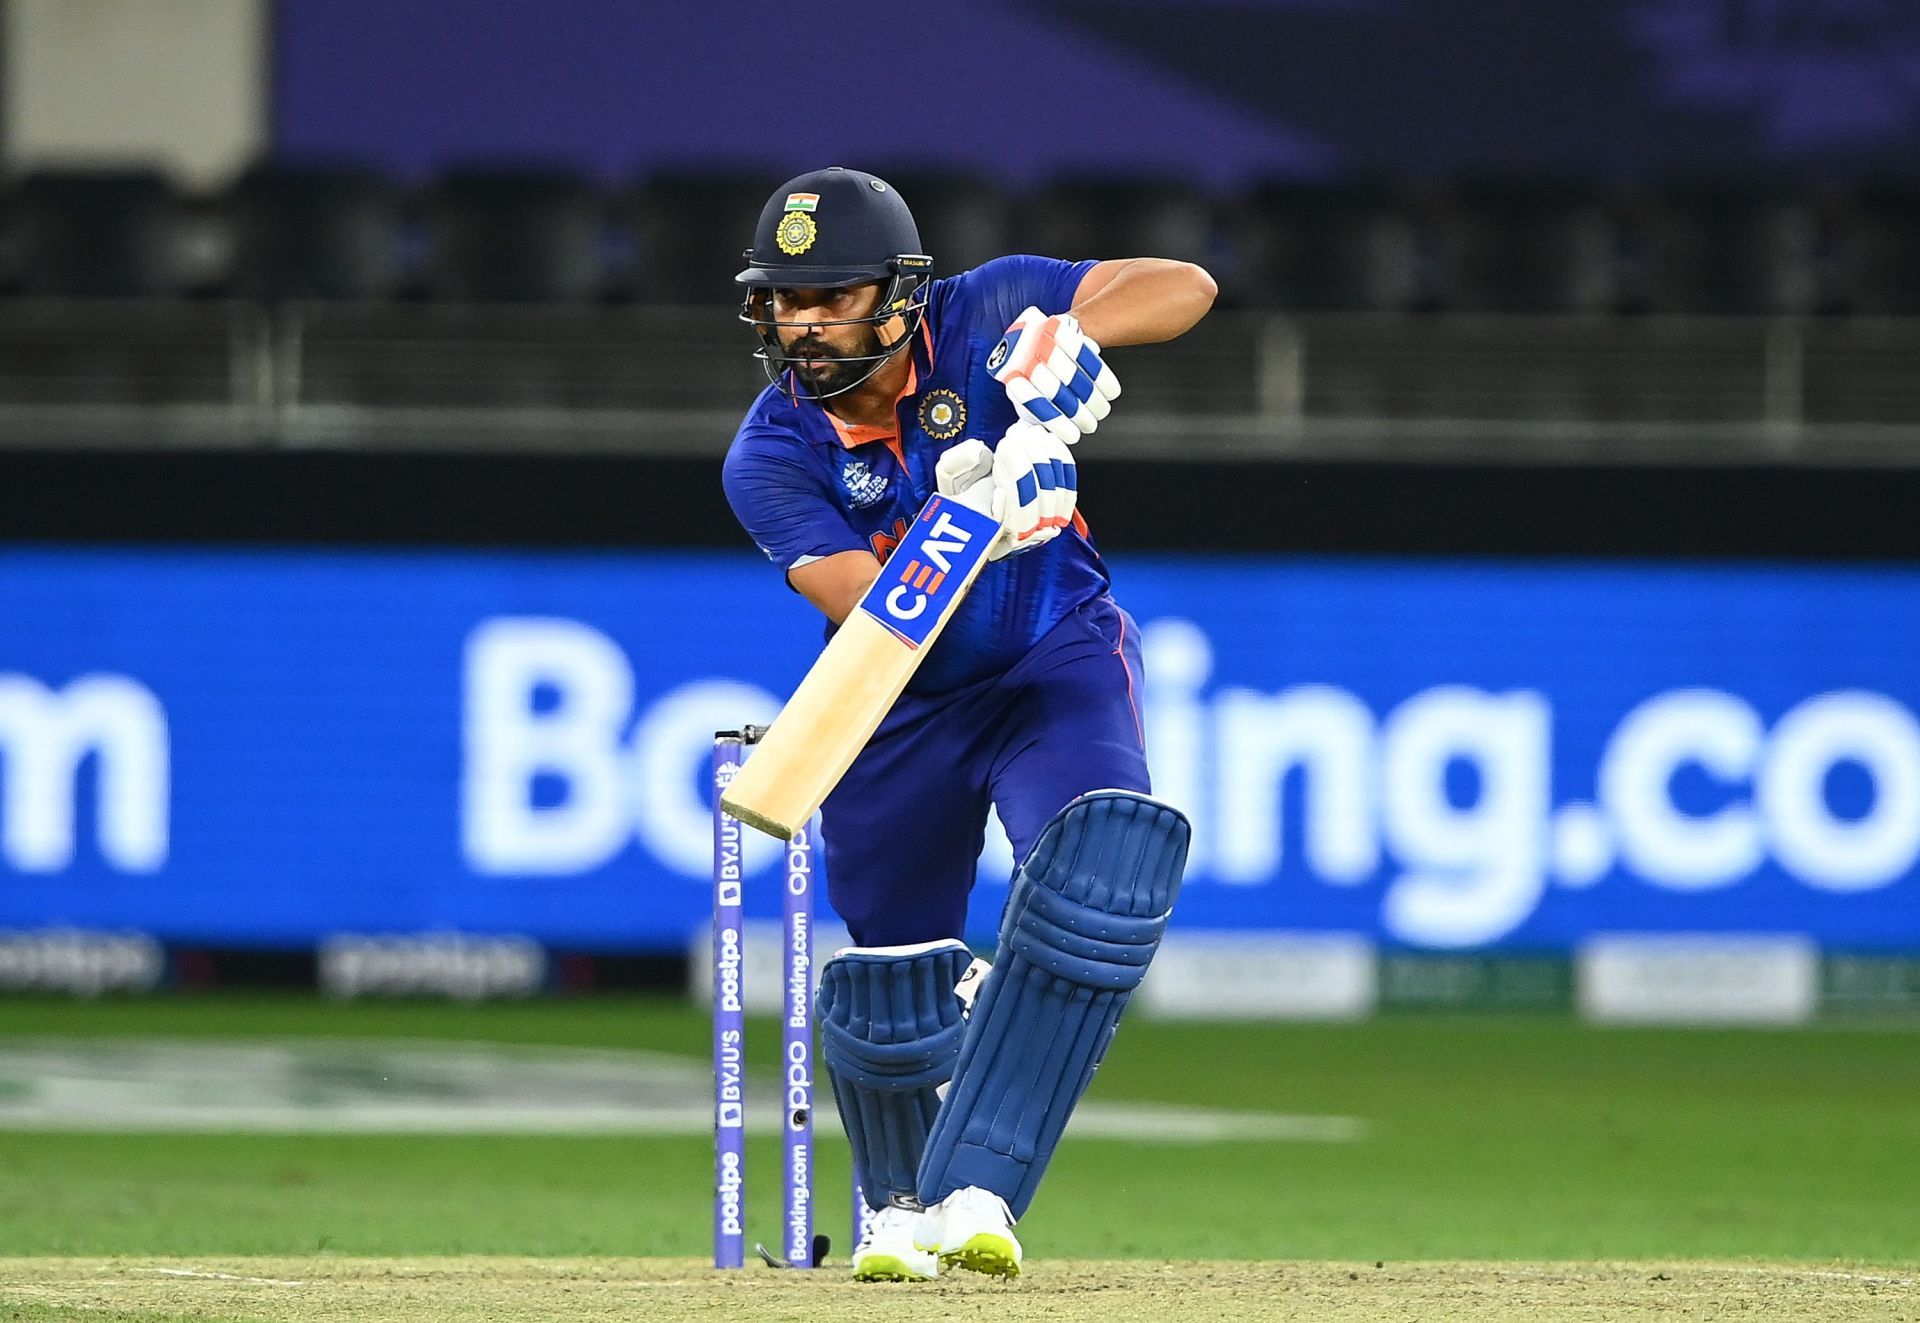 Aakash Chopra believes Rohit Sharma has to bat at the top of the order